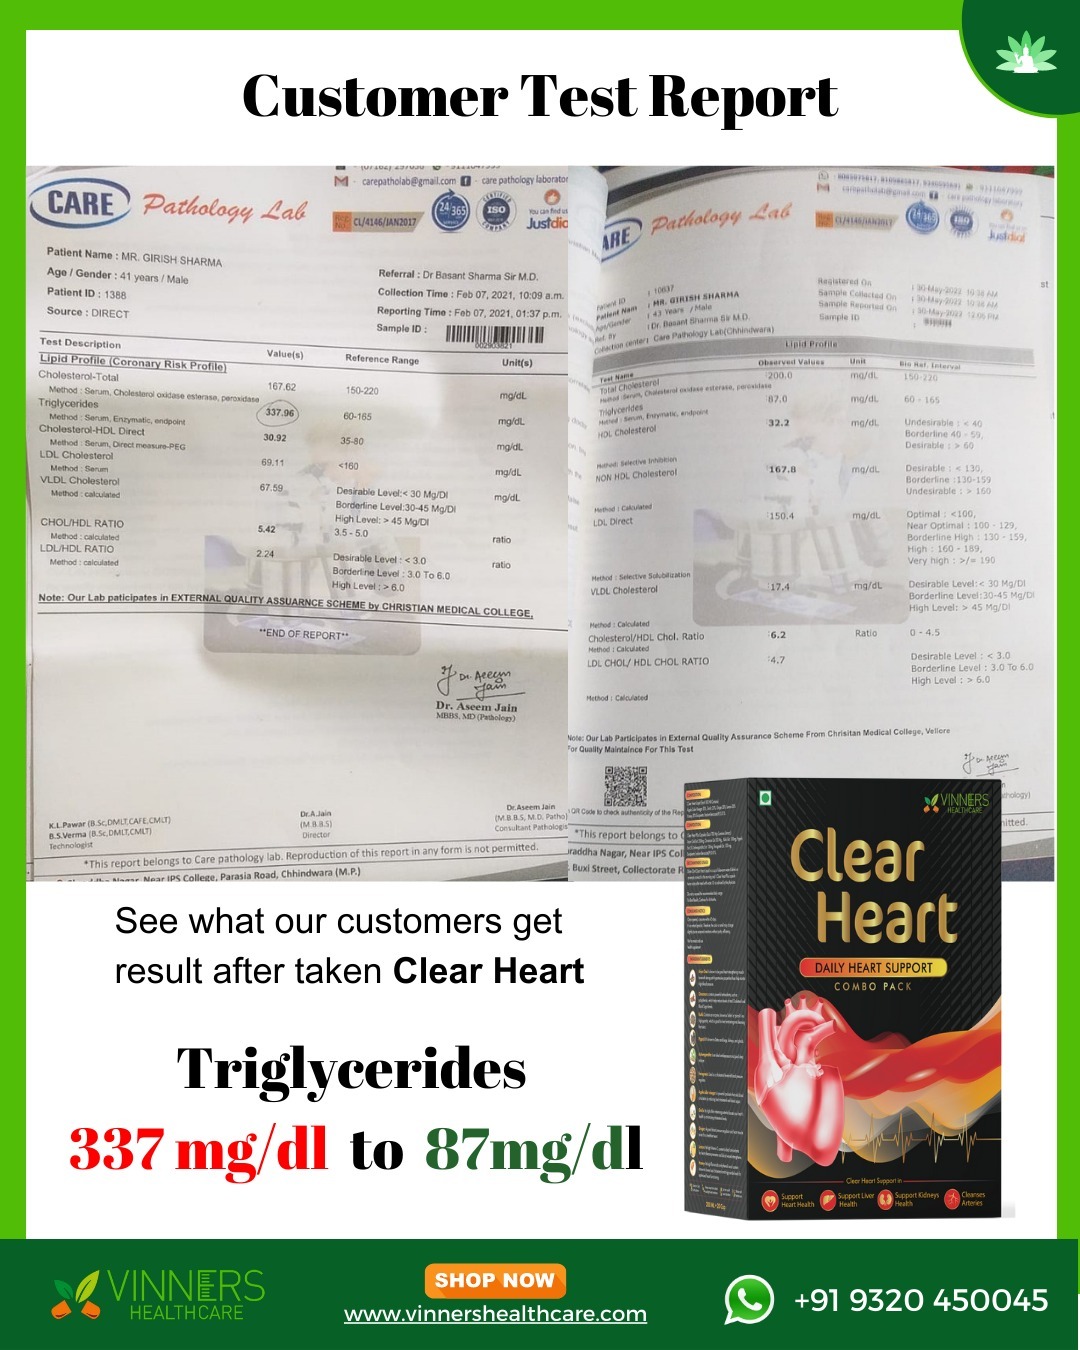 Doctor’s Recommended Clear Heart Supplement - 45 Days Pack ( ₹ 3150/- )